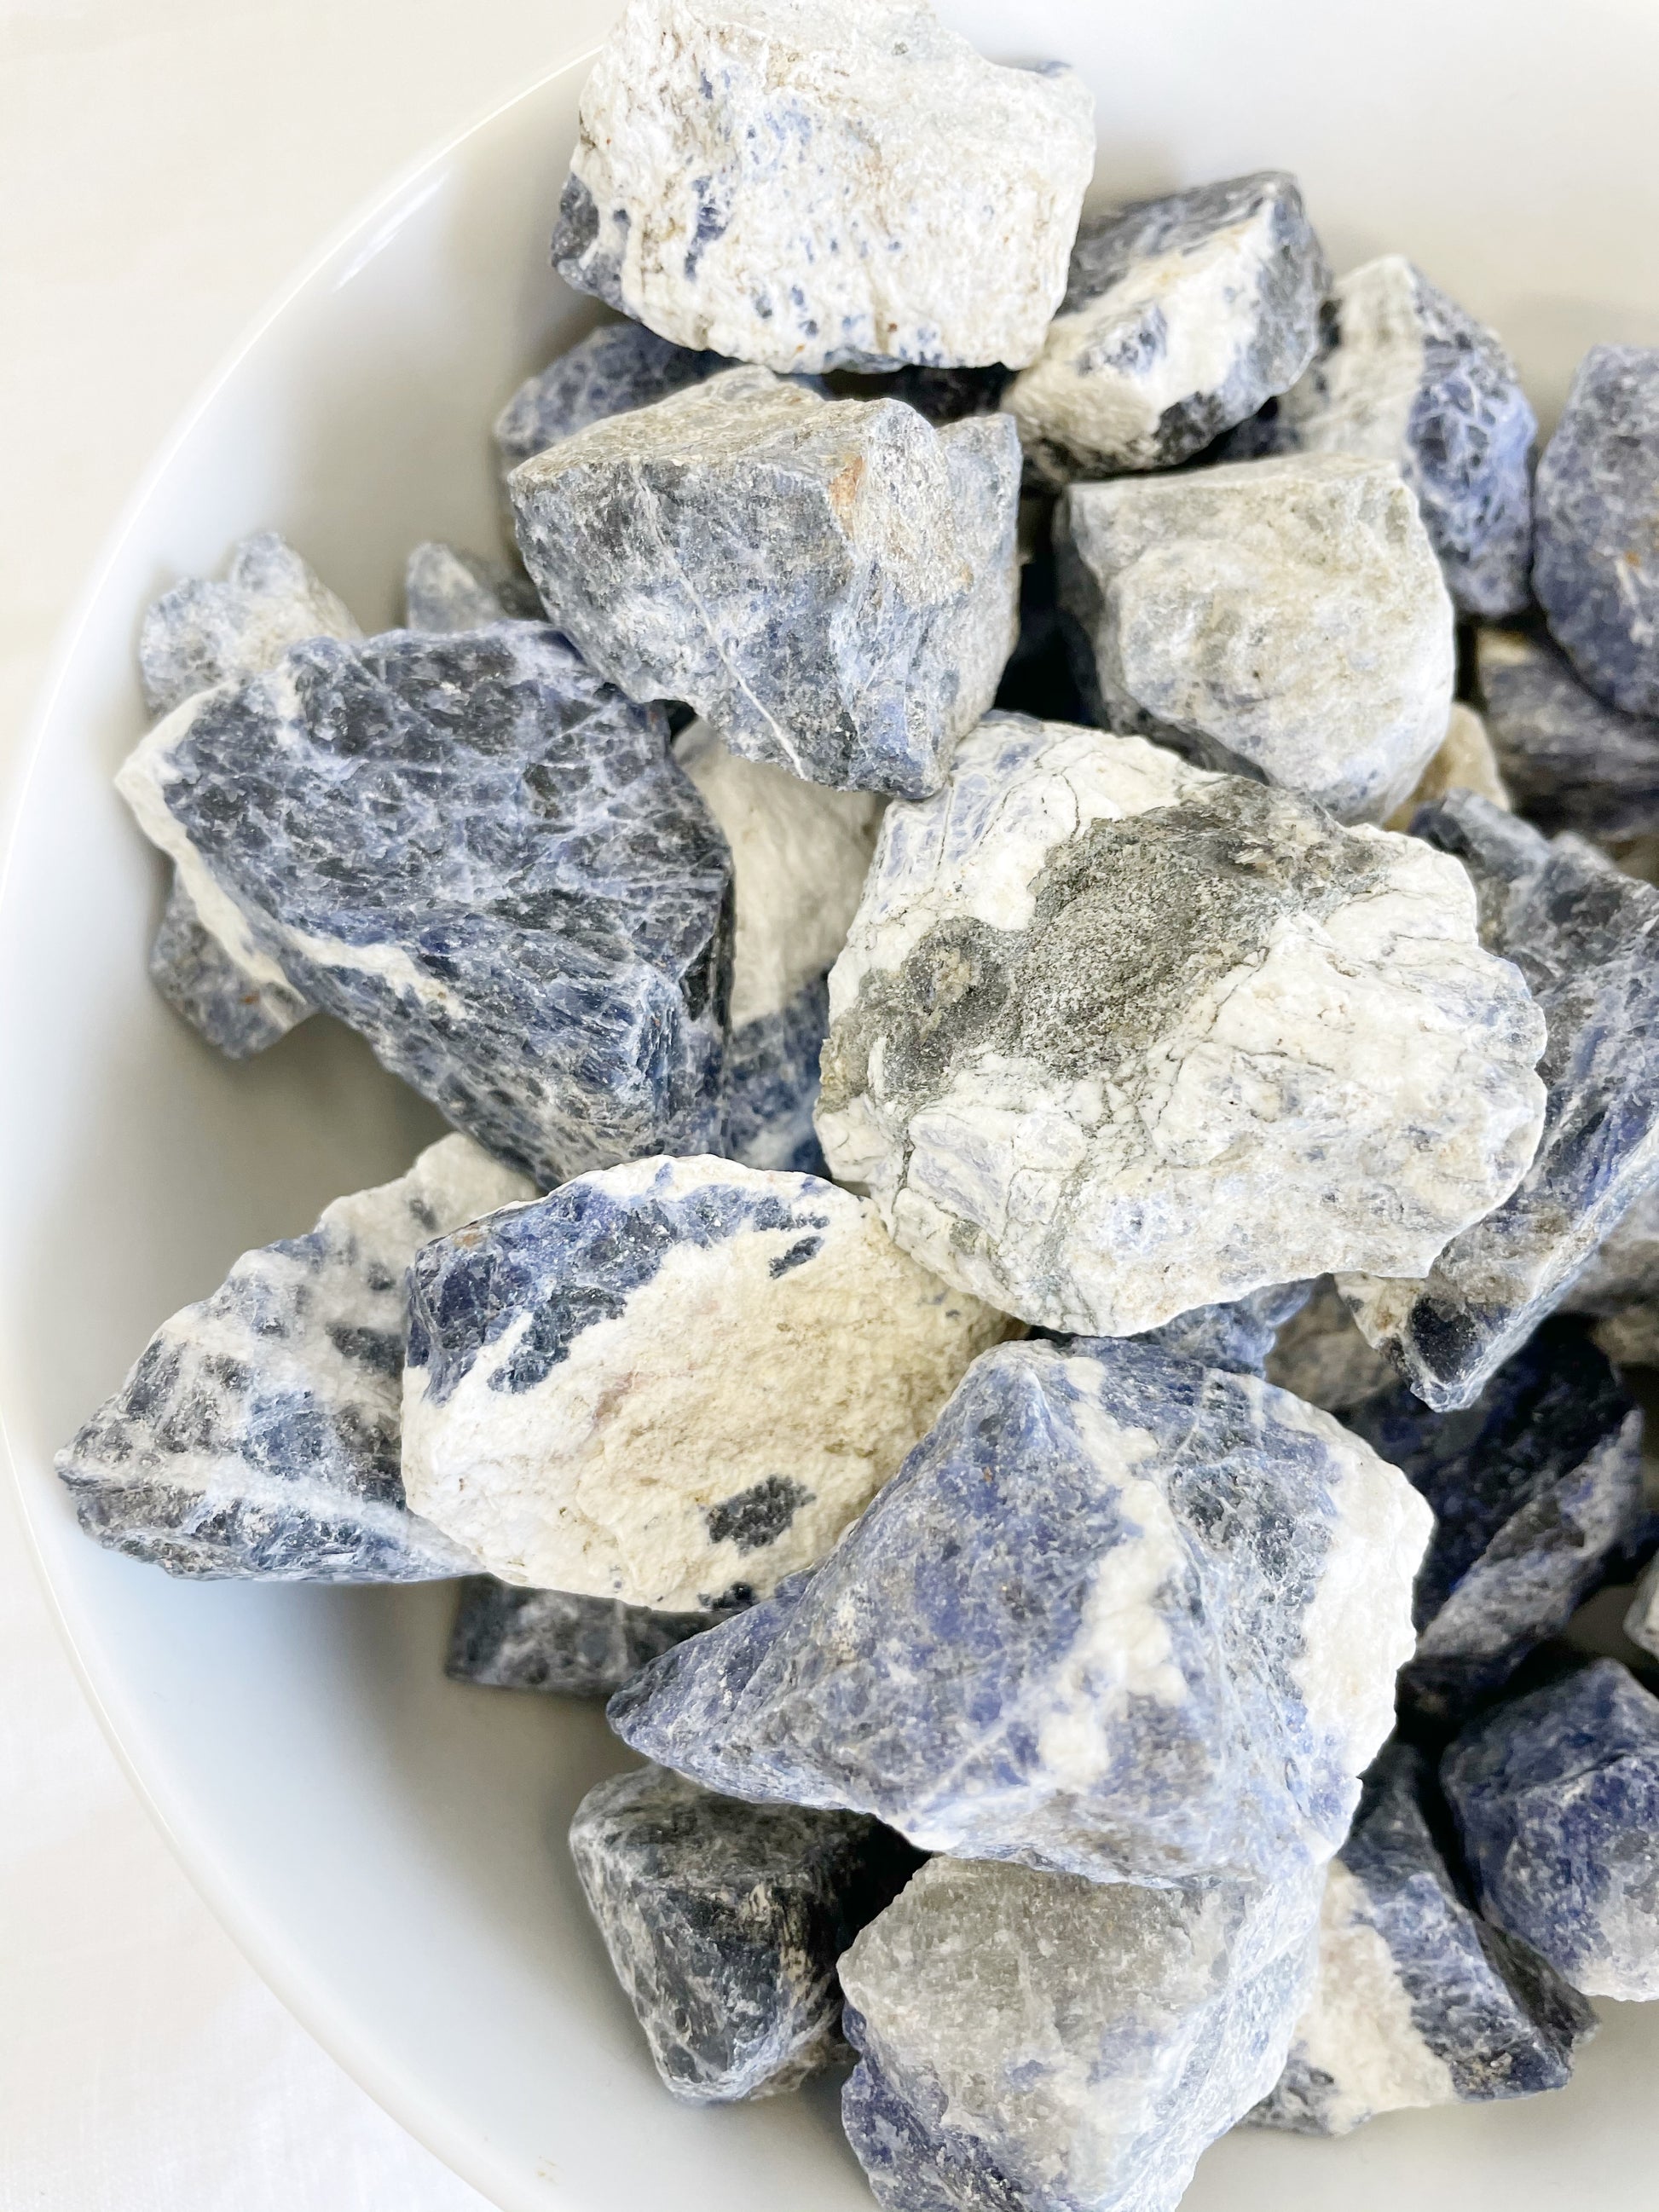 SODALITE ROUGH, STONED AND SAGED AUSTRALIA